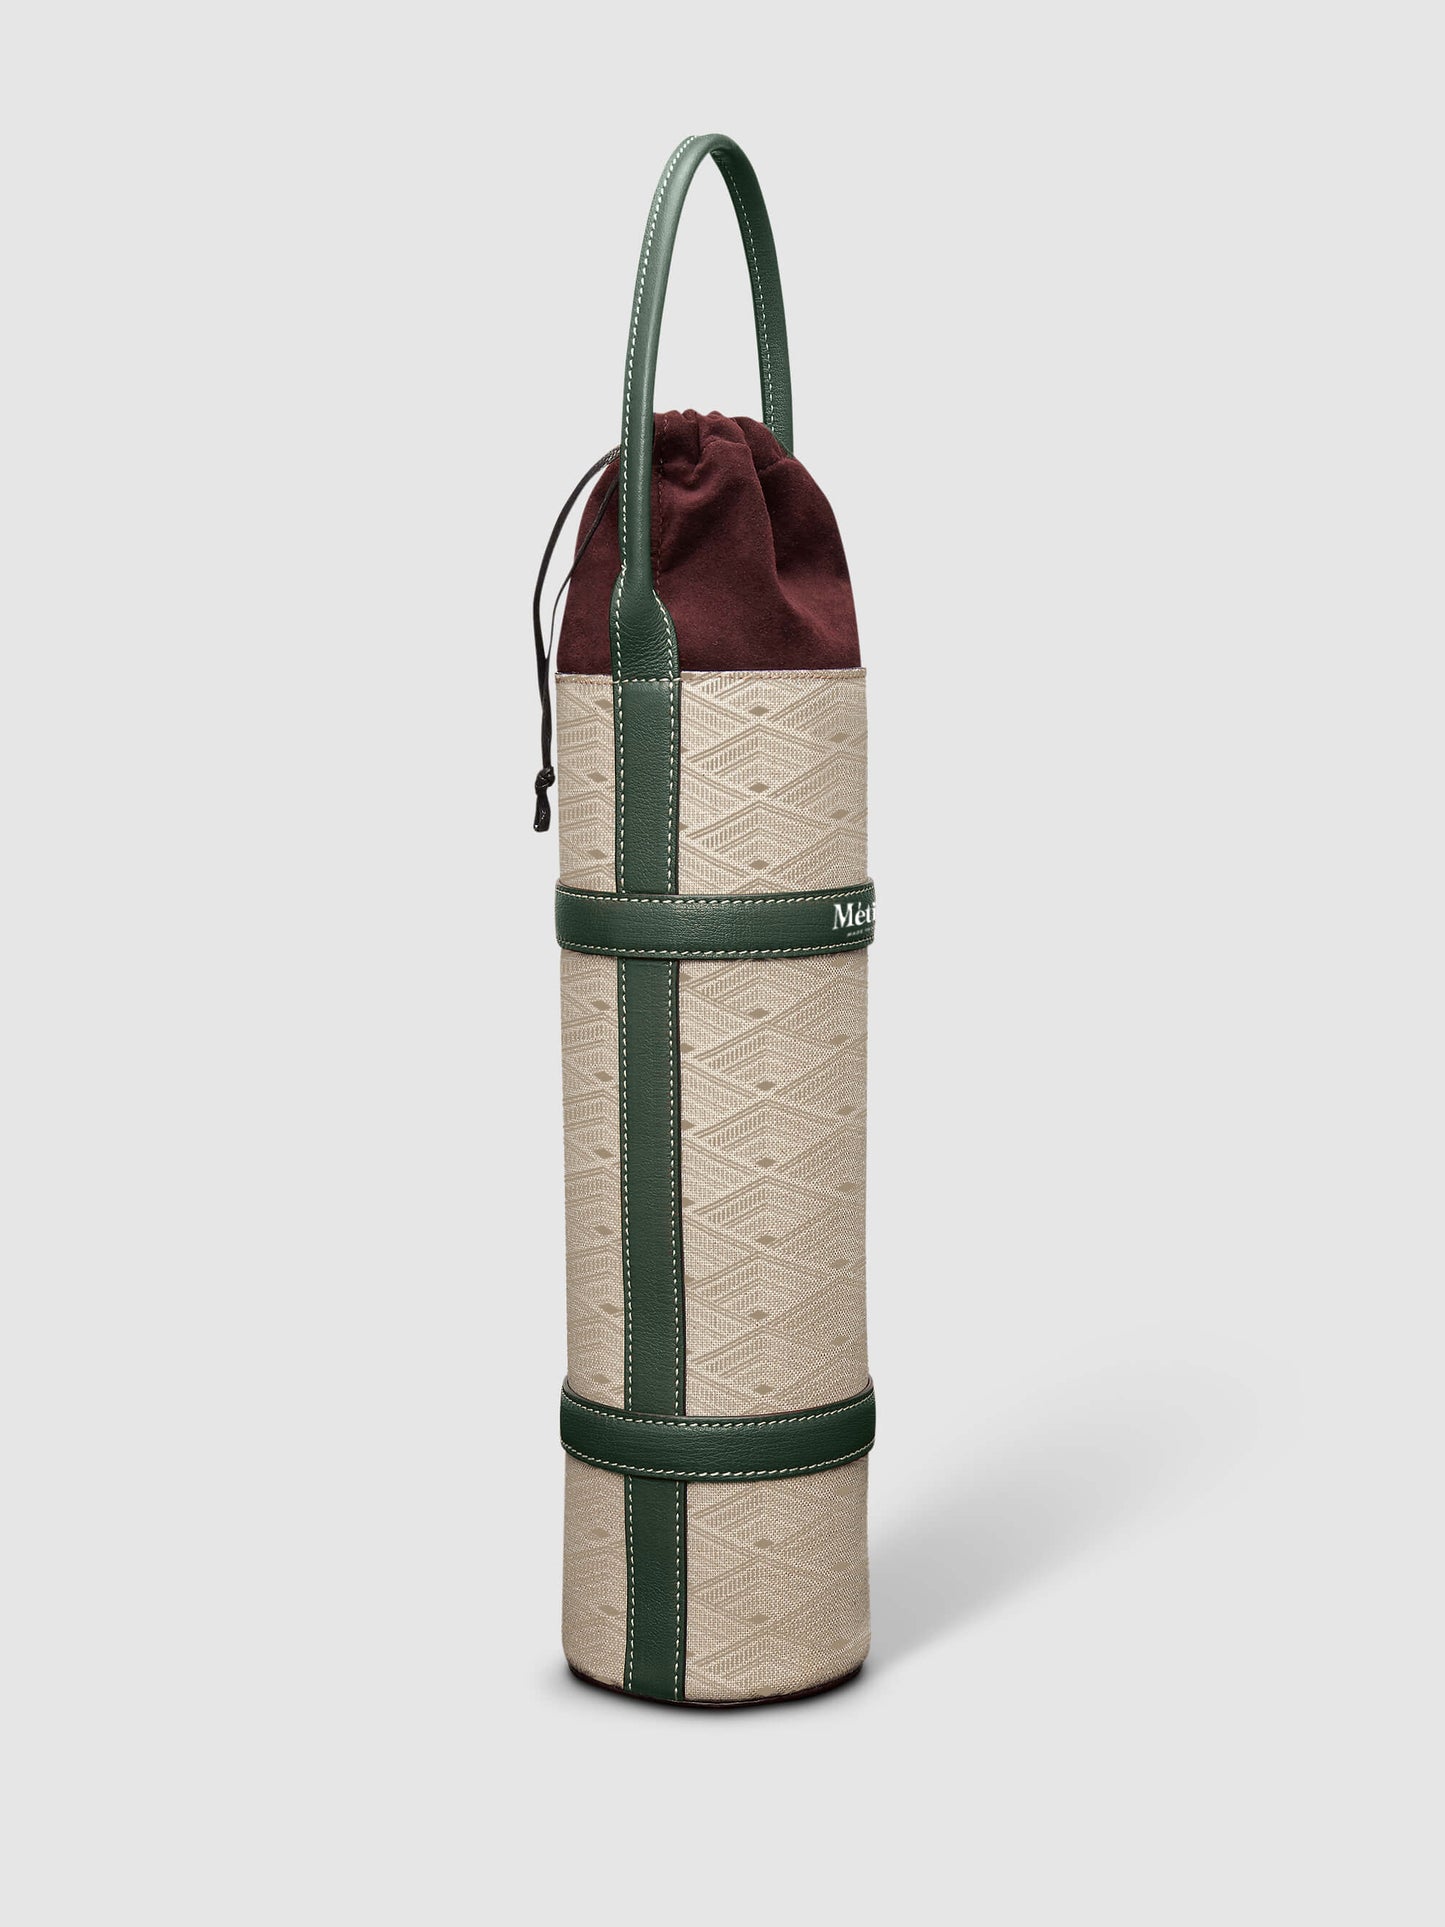 The » Bring a Bottle « wine carrier